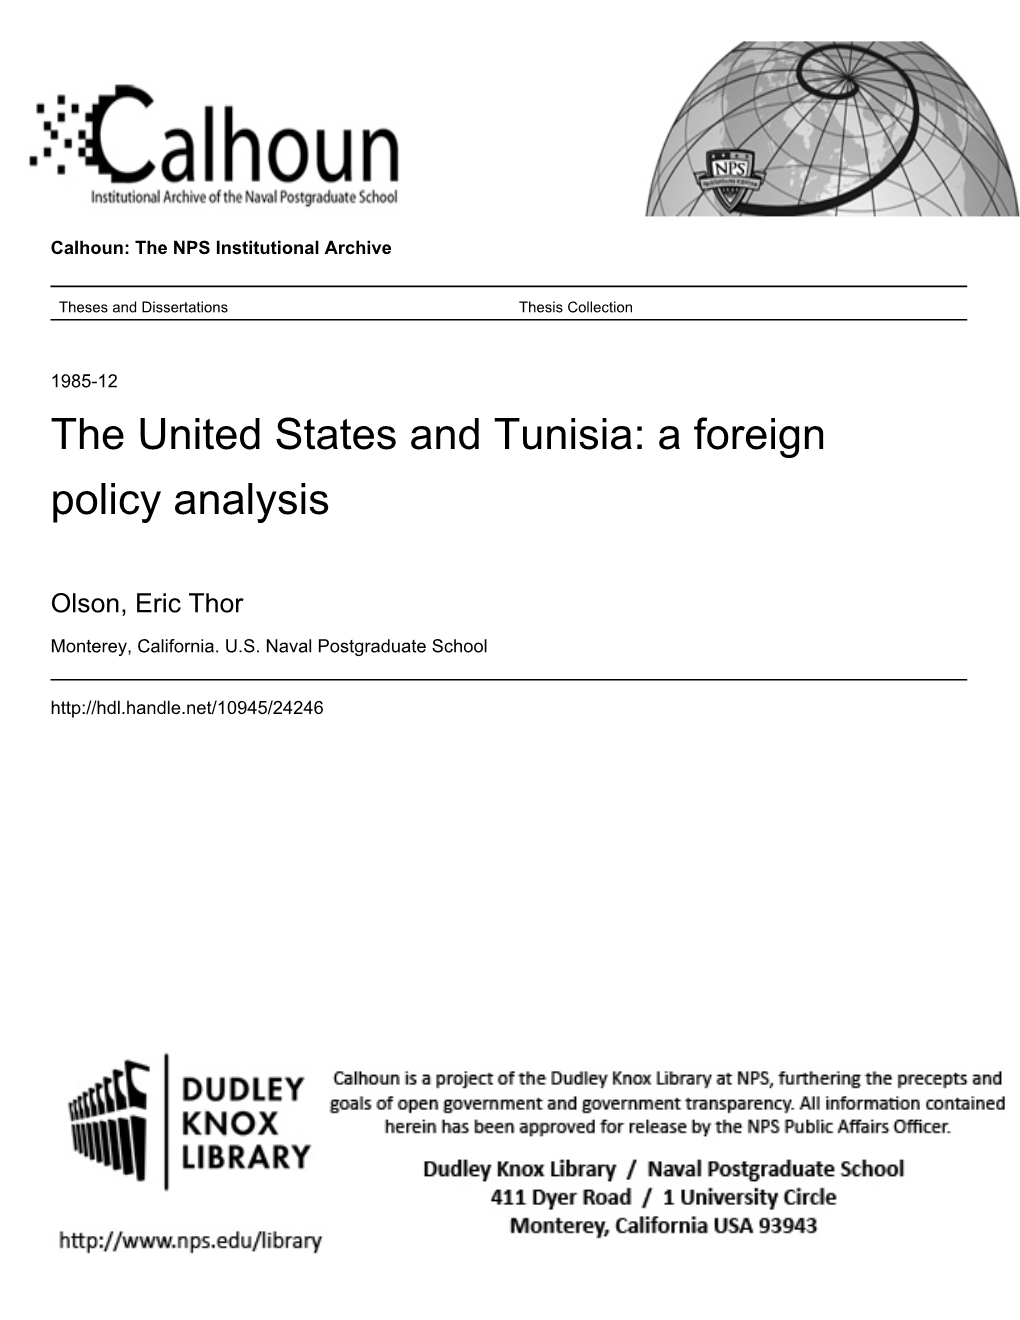 A Foreign Policy Analysis